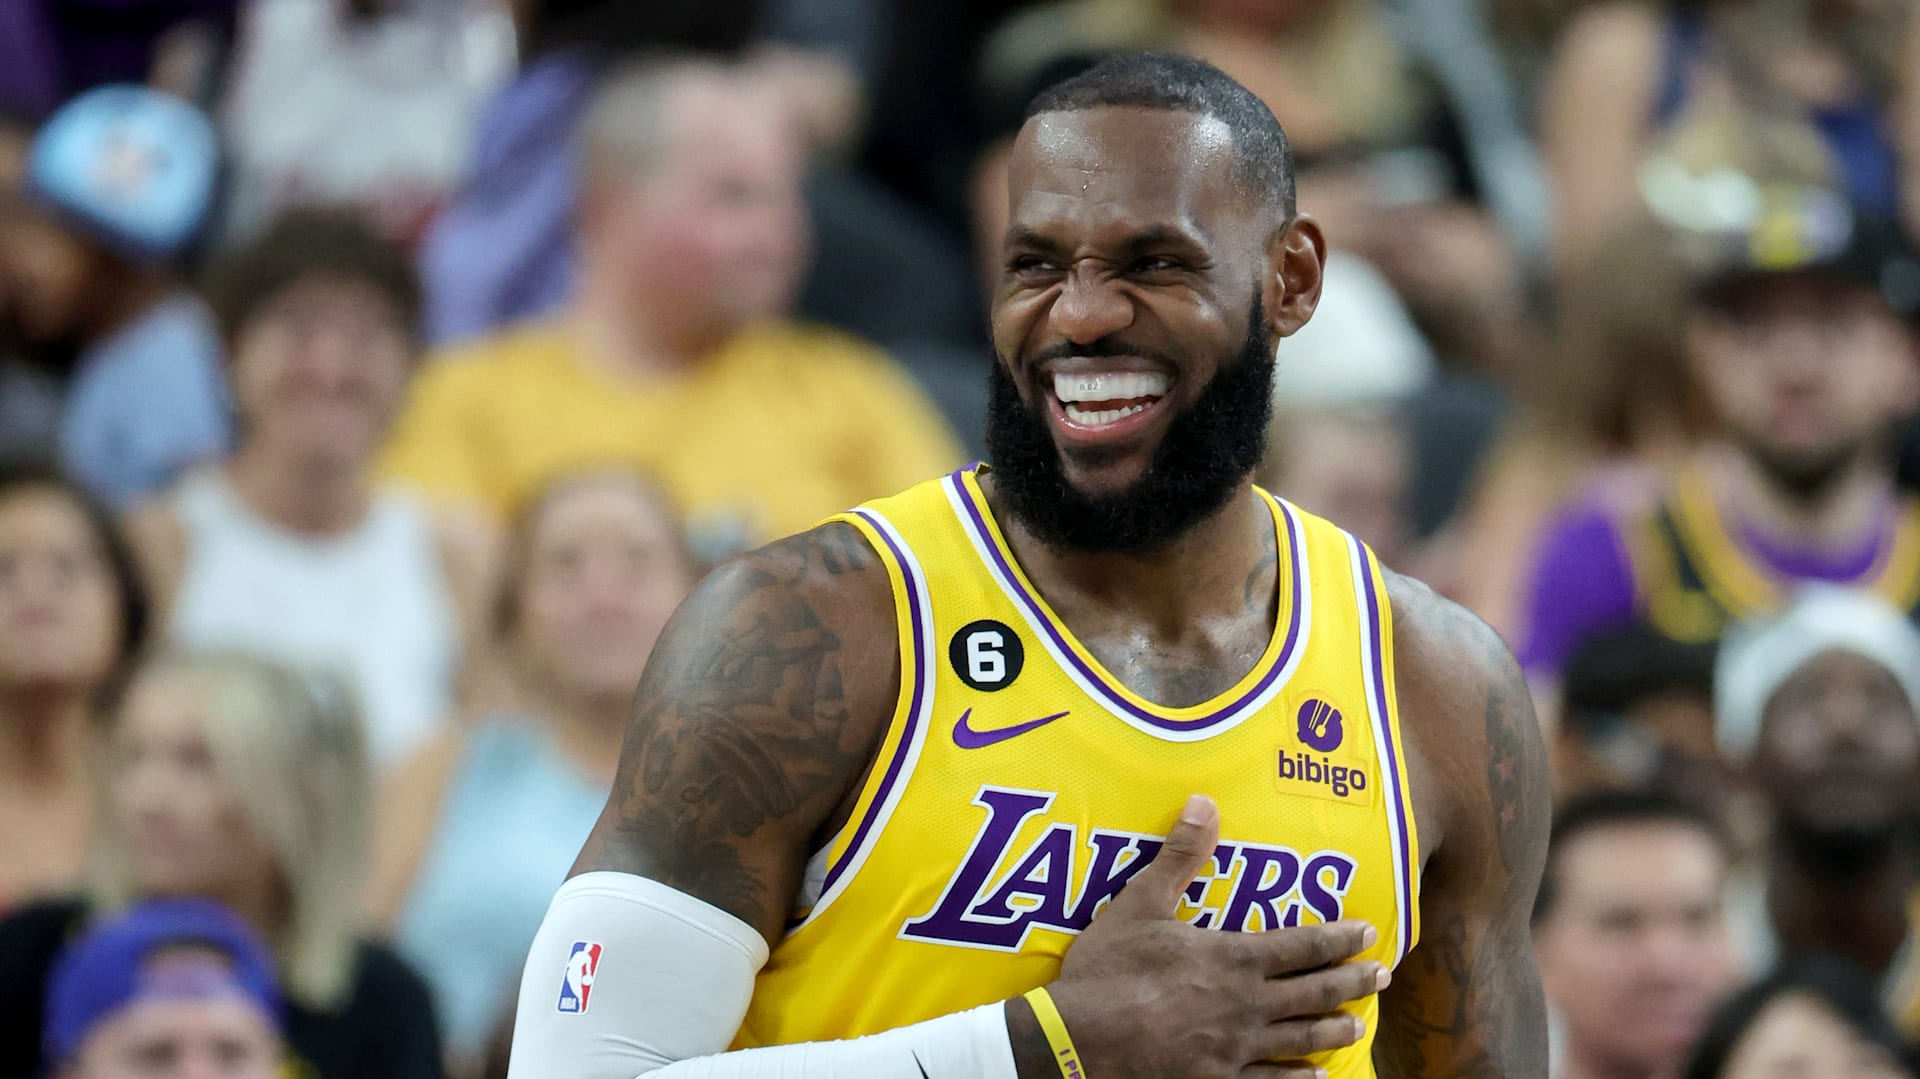 Ten reasons why LeBron James is loved on and off the court